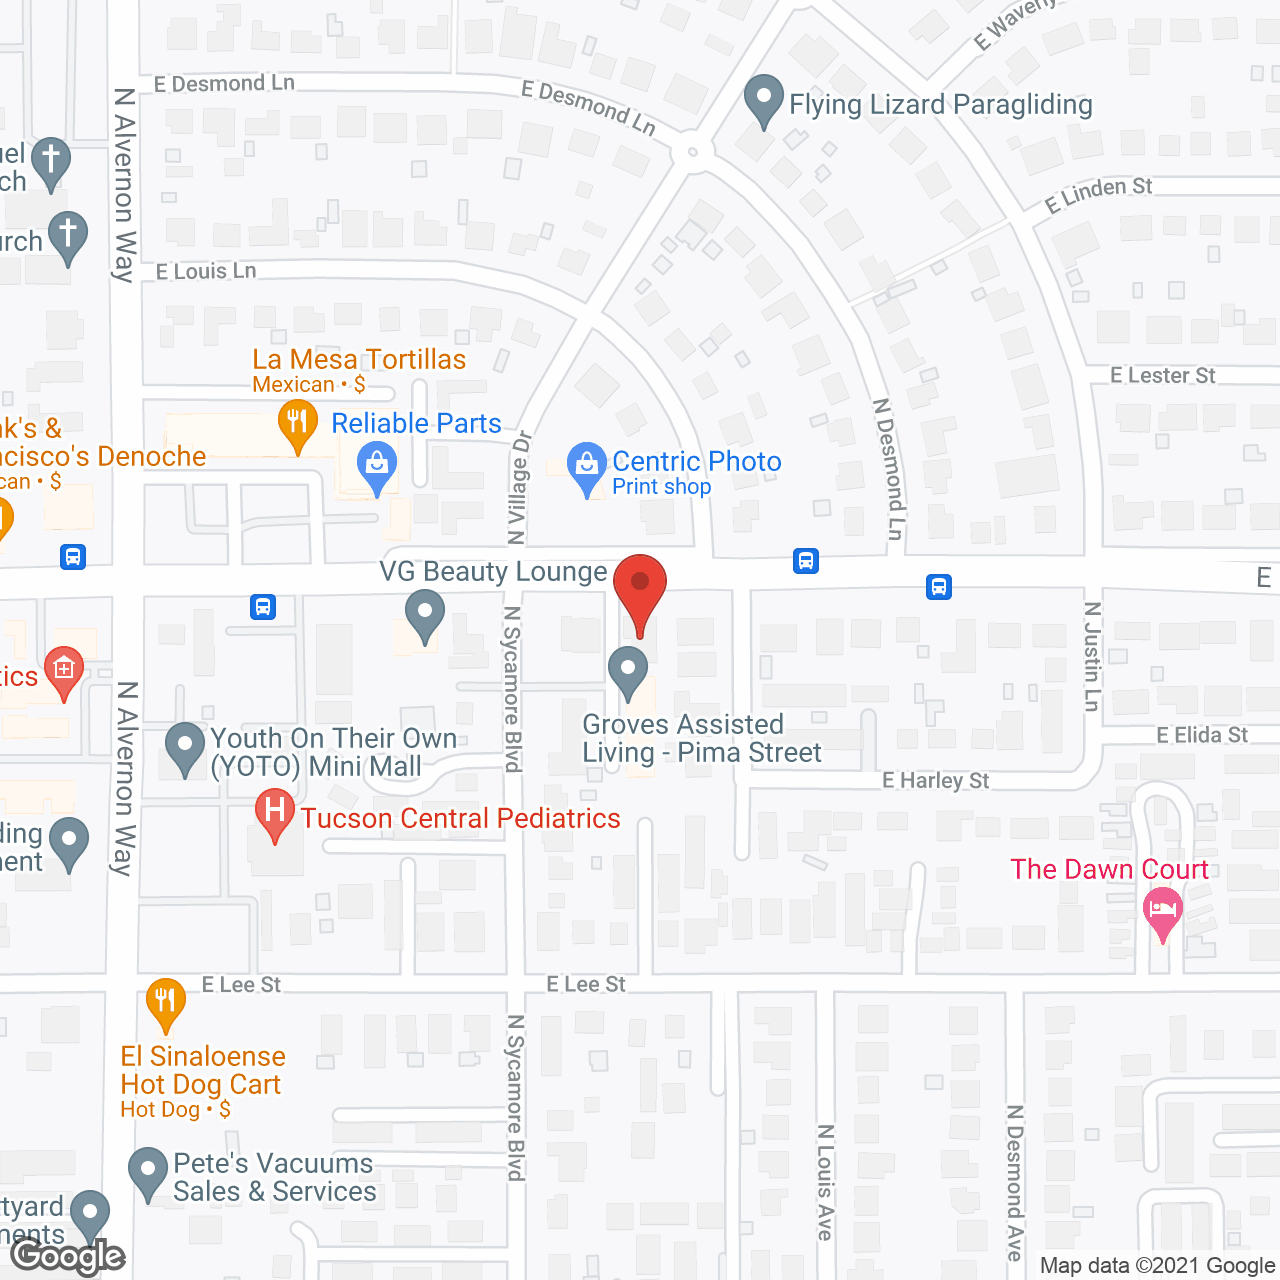 Groves Assisted Living - Pima in google map